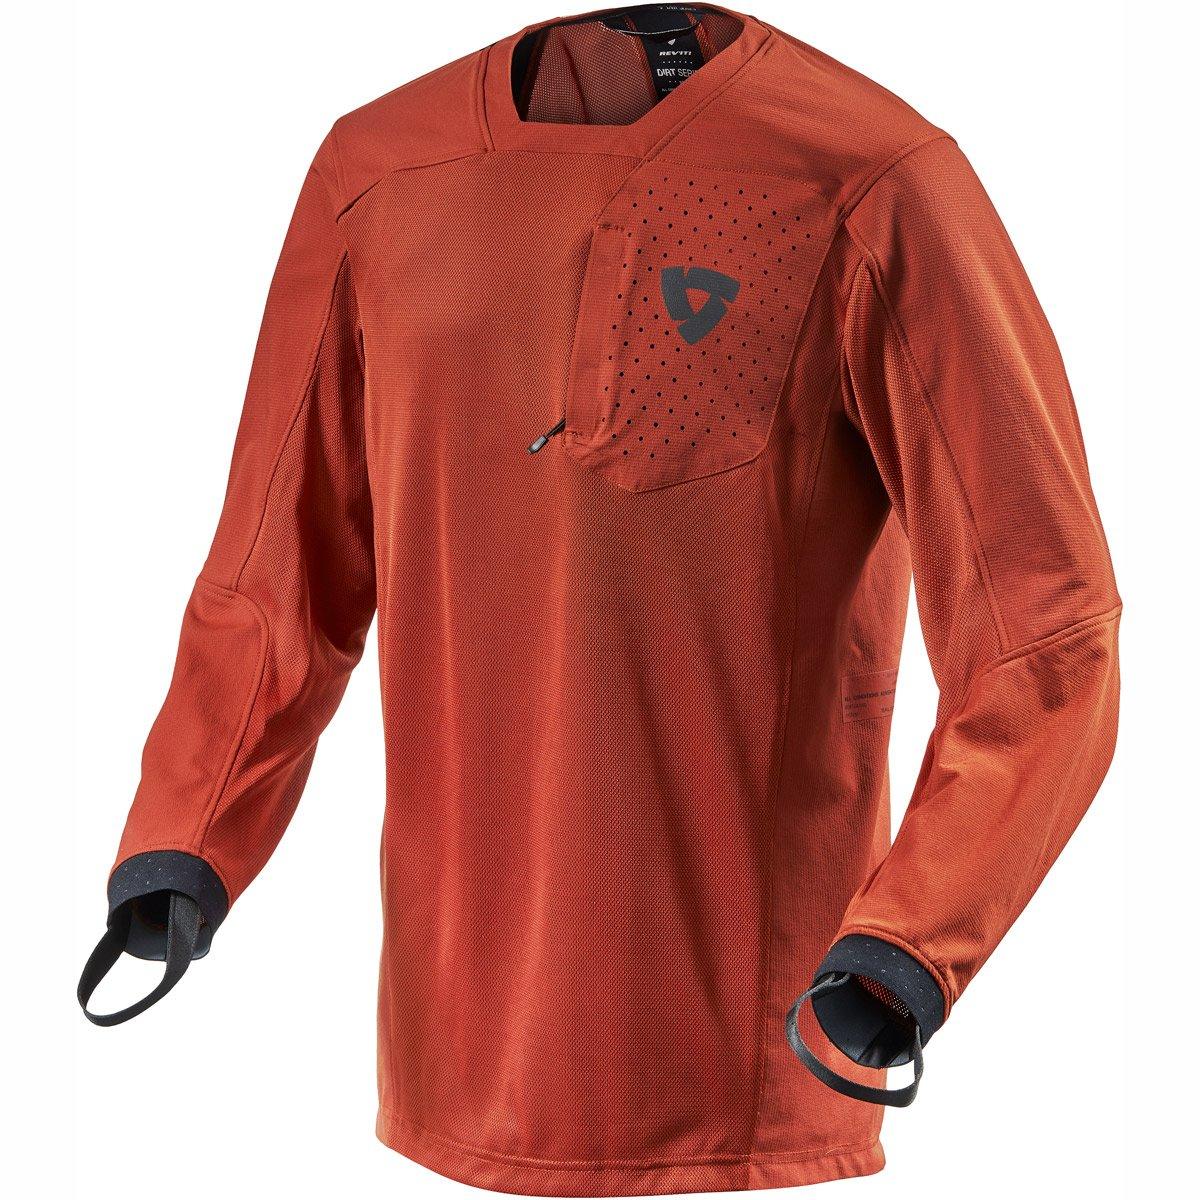 Rev It! Sierra Enduro Jersey - Burgundy Red - Browse our range of Clothing: Overshirts - getgearedshop 